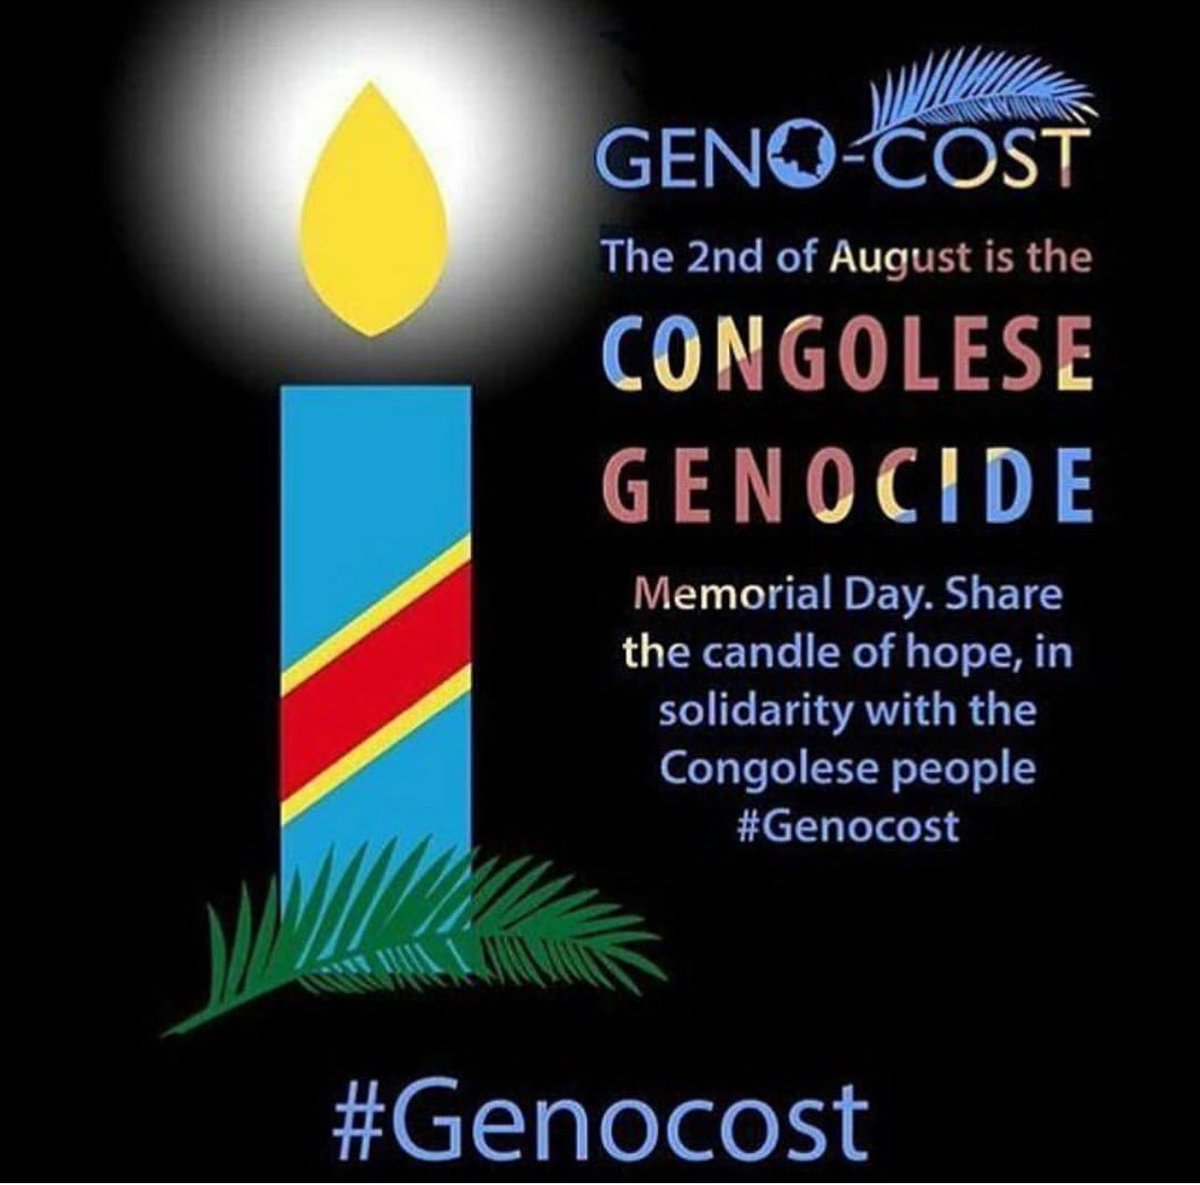 Nearly a century passed before the world acknowledged the genocide against the Armenian people. Yet, even if it requires 100years for the ongoing Congolese genocide (@genocost) from King Leopold II’s era to present to be recognized, we will persist in our demand for justice.